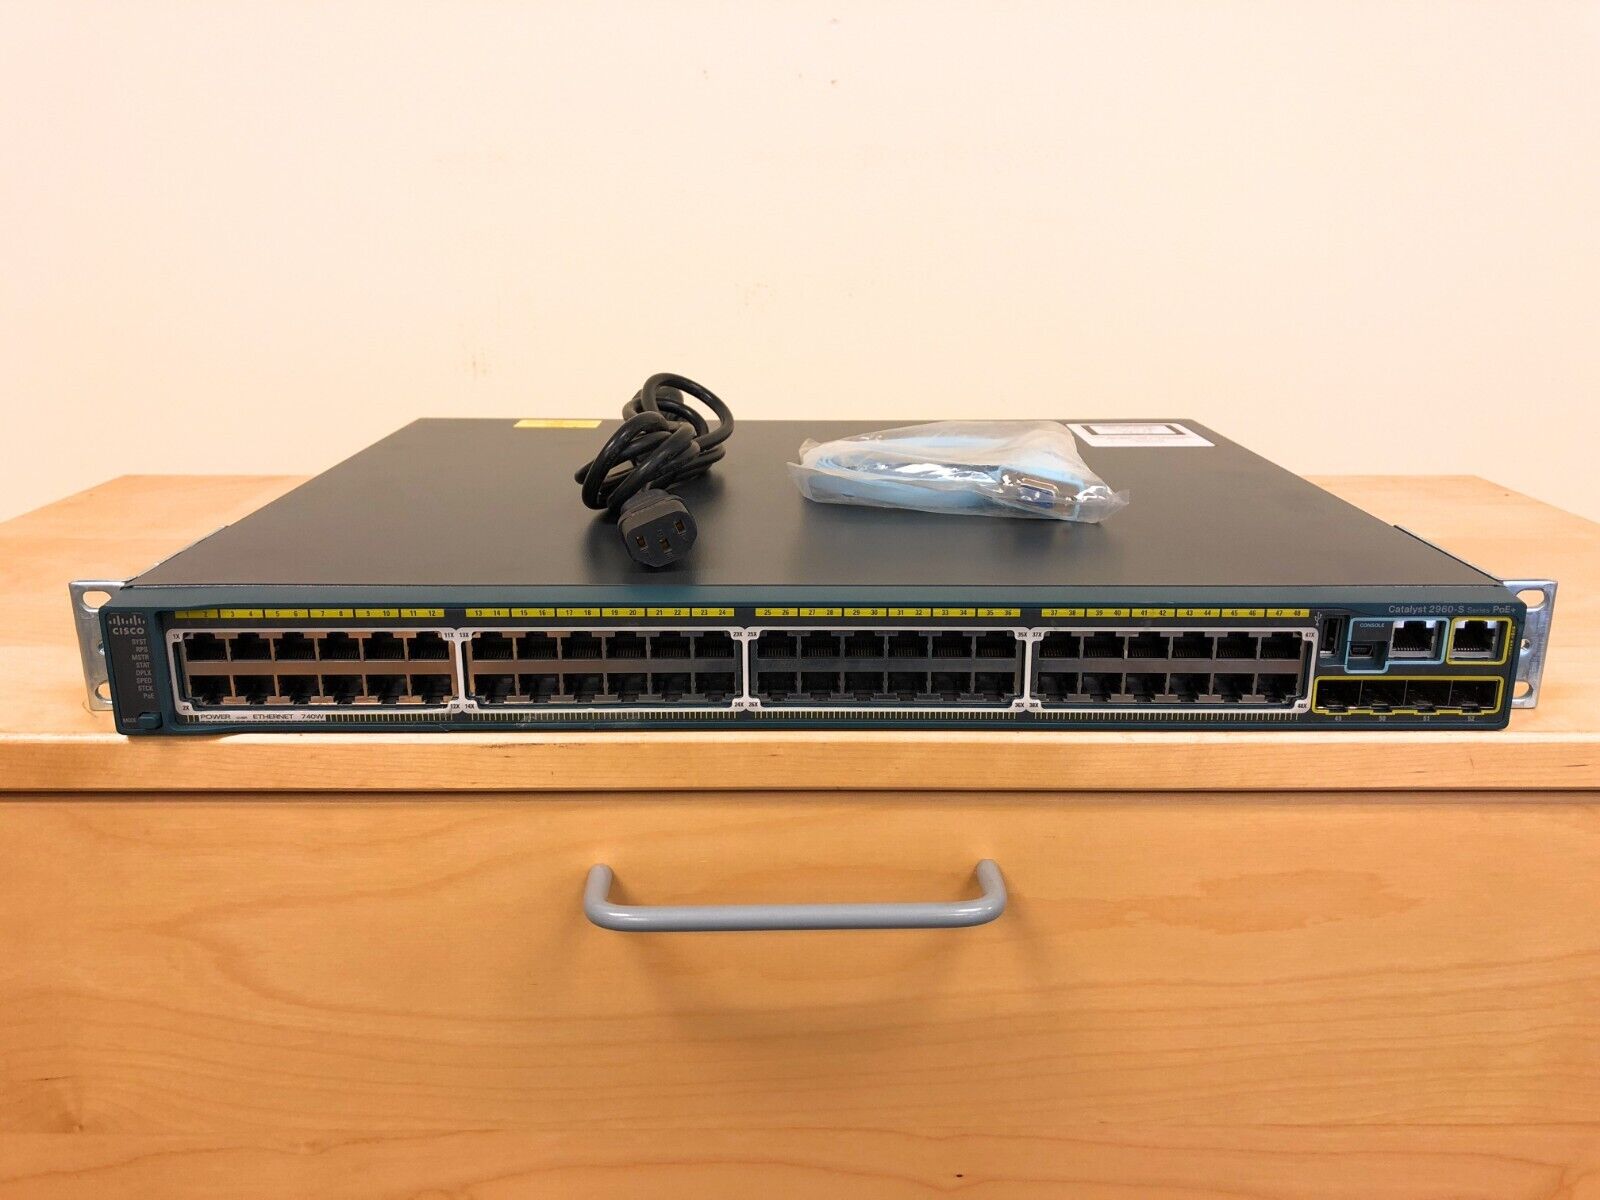 Cisco Catalyst 2960S WS-C2960S-48FPS-L 48 Ports POE Rack Mount Switch with Ears